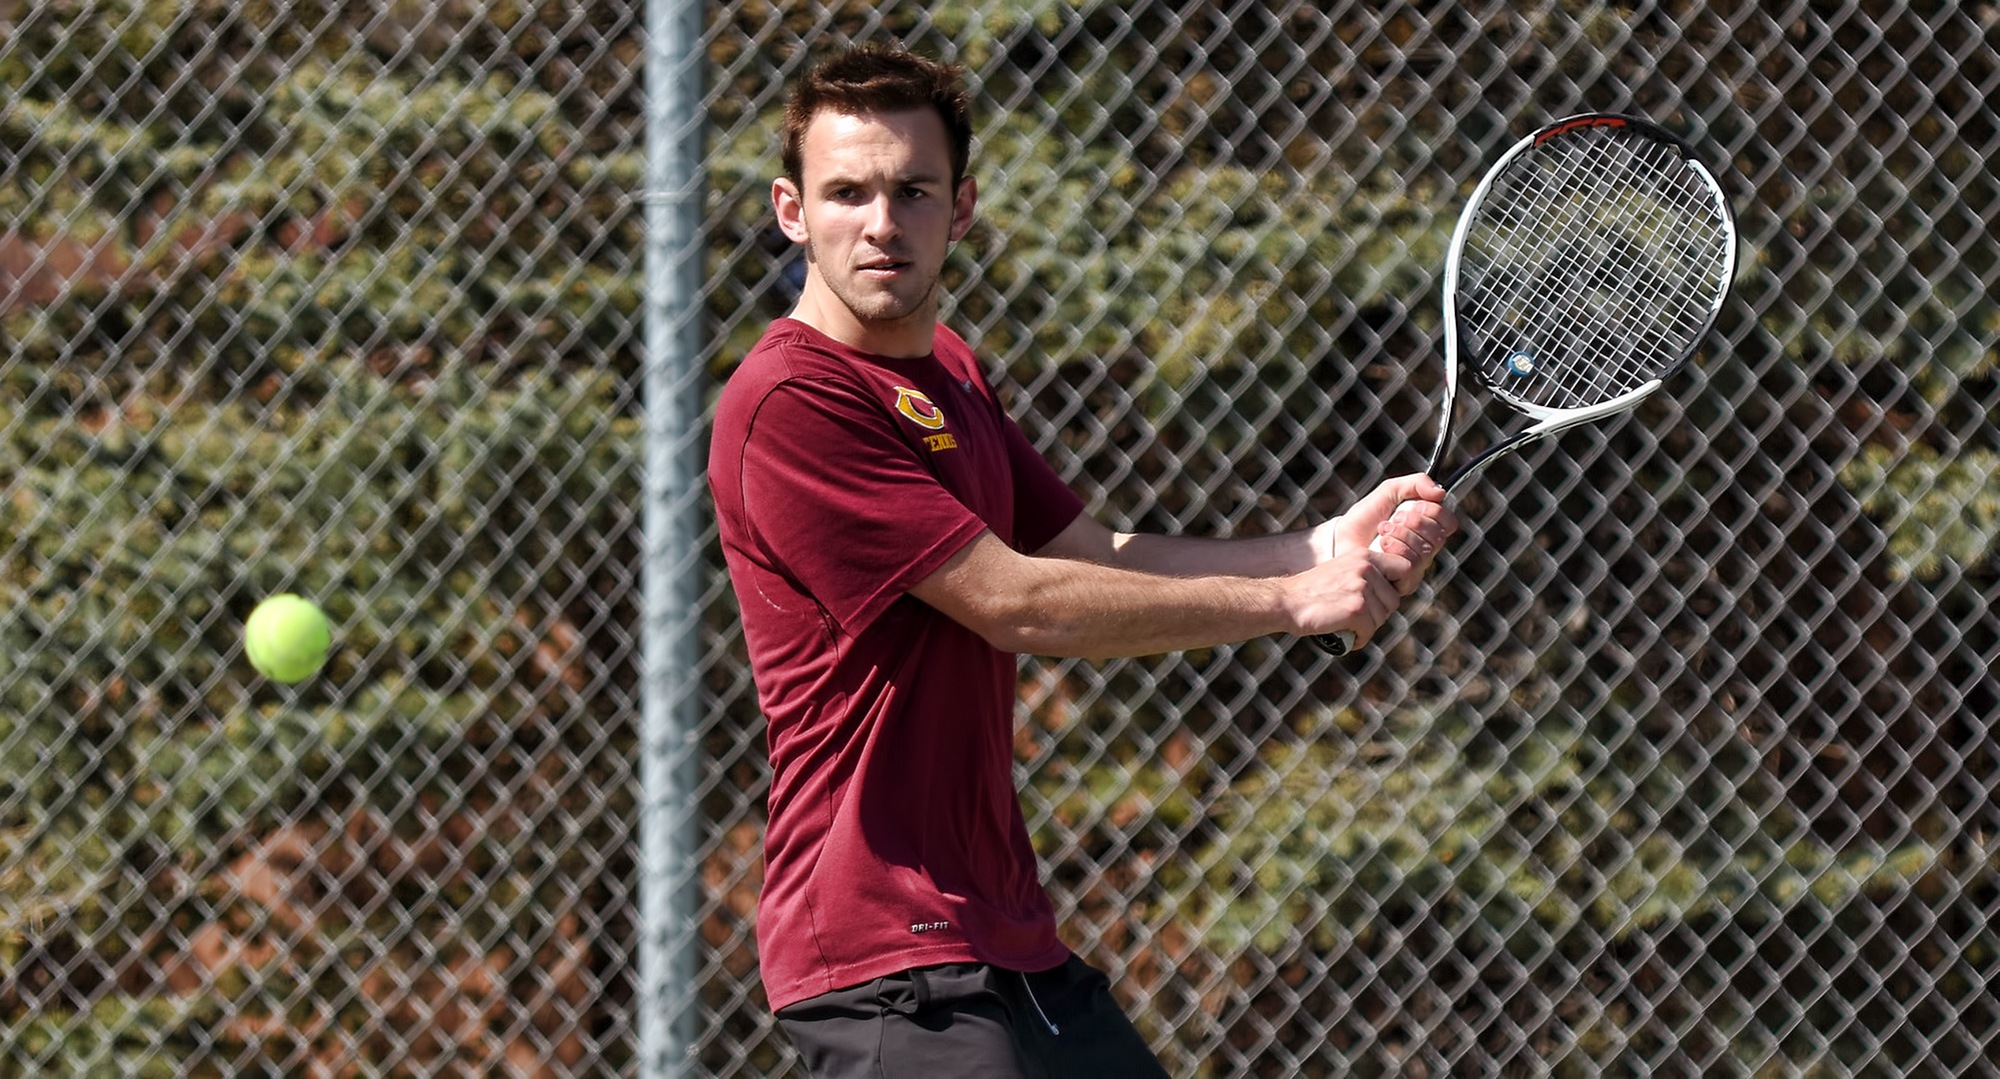 Senior David Youngs won his singles match against a DII opponent from Augustana (S.D.) during the Cobbers' annual I-29 Battle with the Vikings and UND.